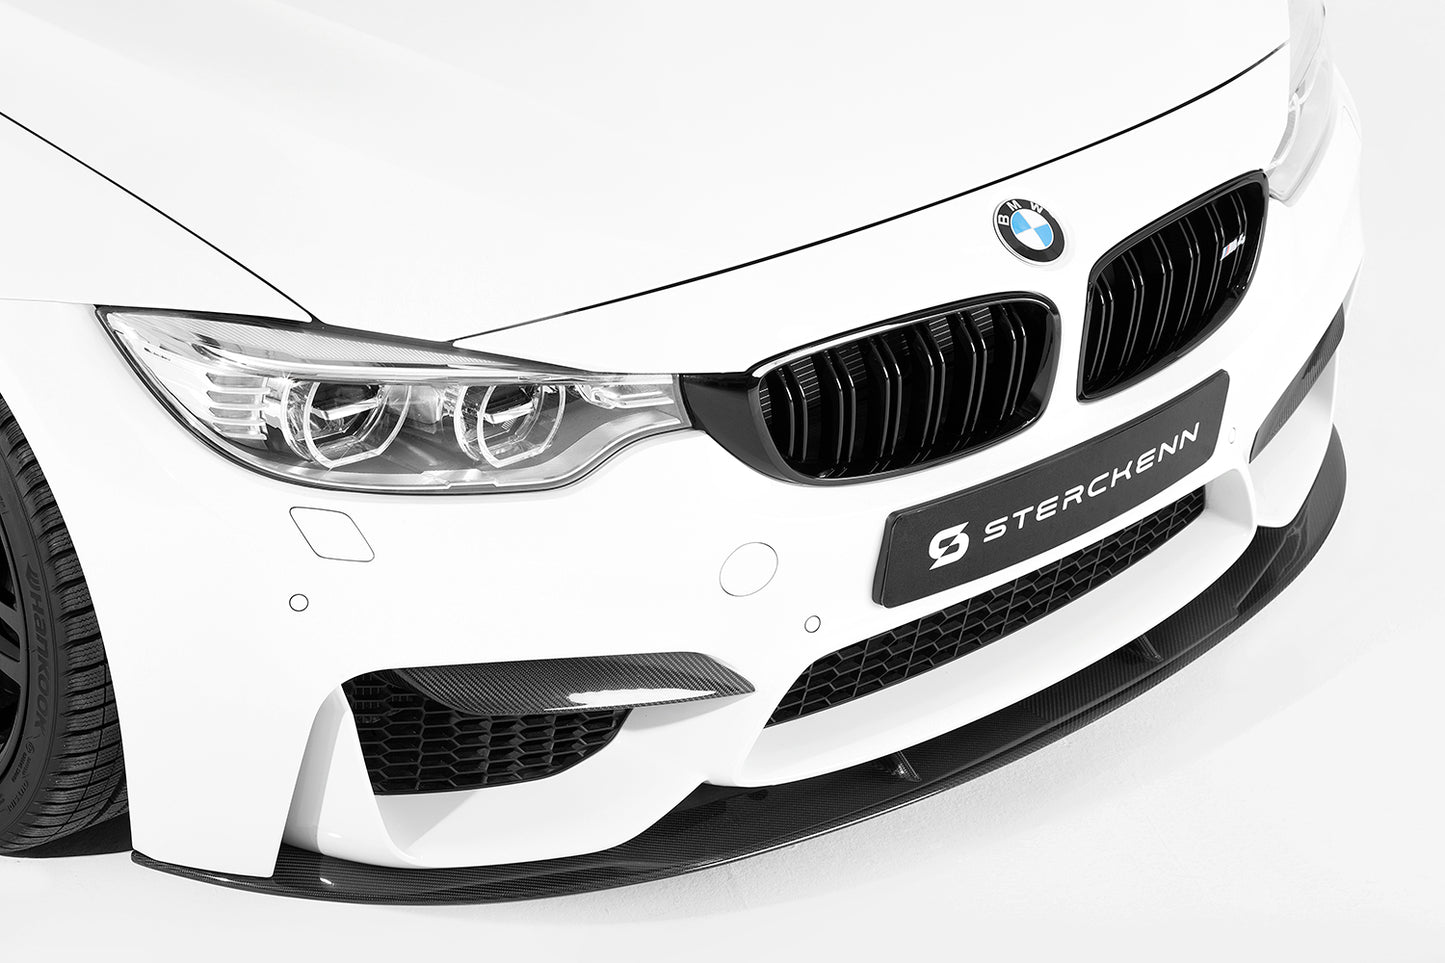 close-up on the front of the white bmw with the sterckenn logo